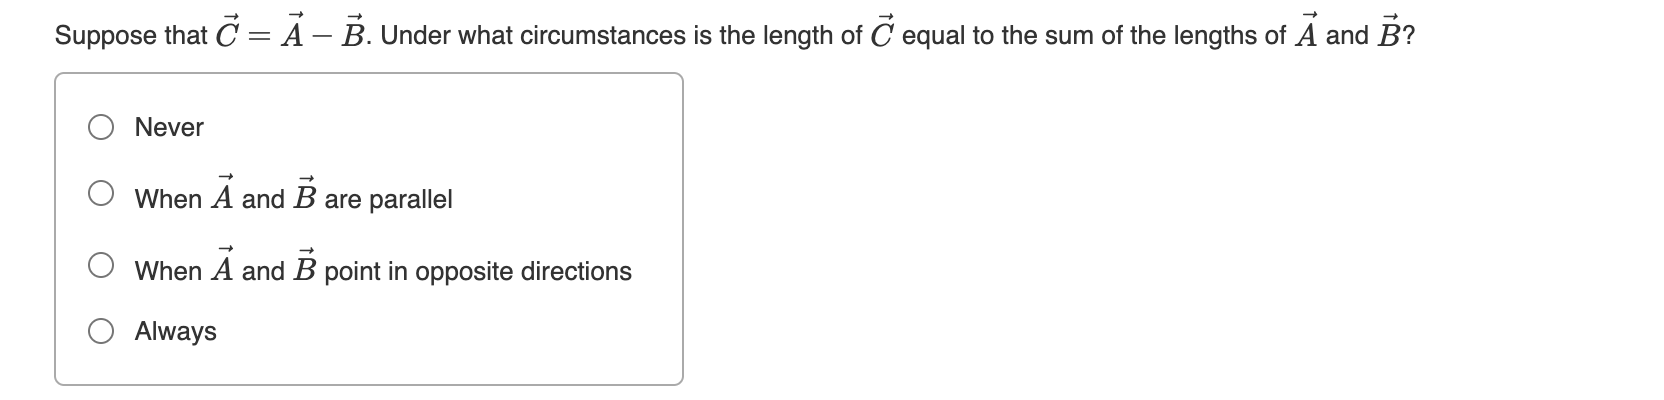 Suppose that C = A – B. Under what circumstances is the length of C equal to the sum of the lengths of A and B?
Never
When
A and B are parallel
When A and B point in opposite directions
O Always
